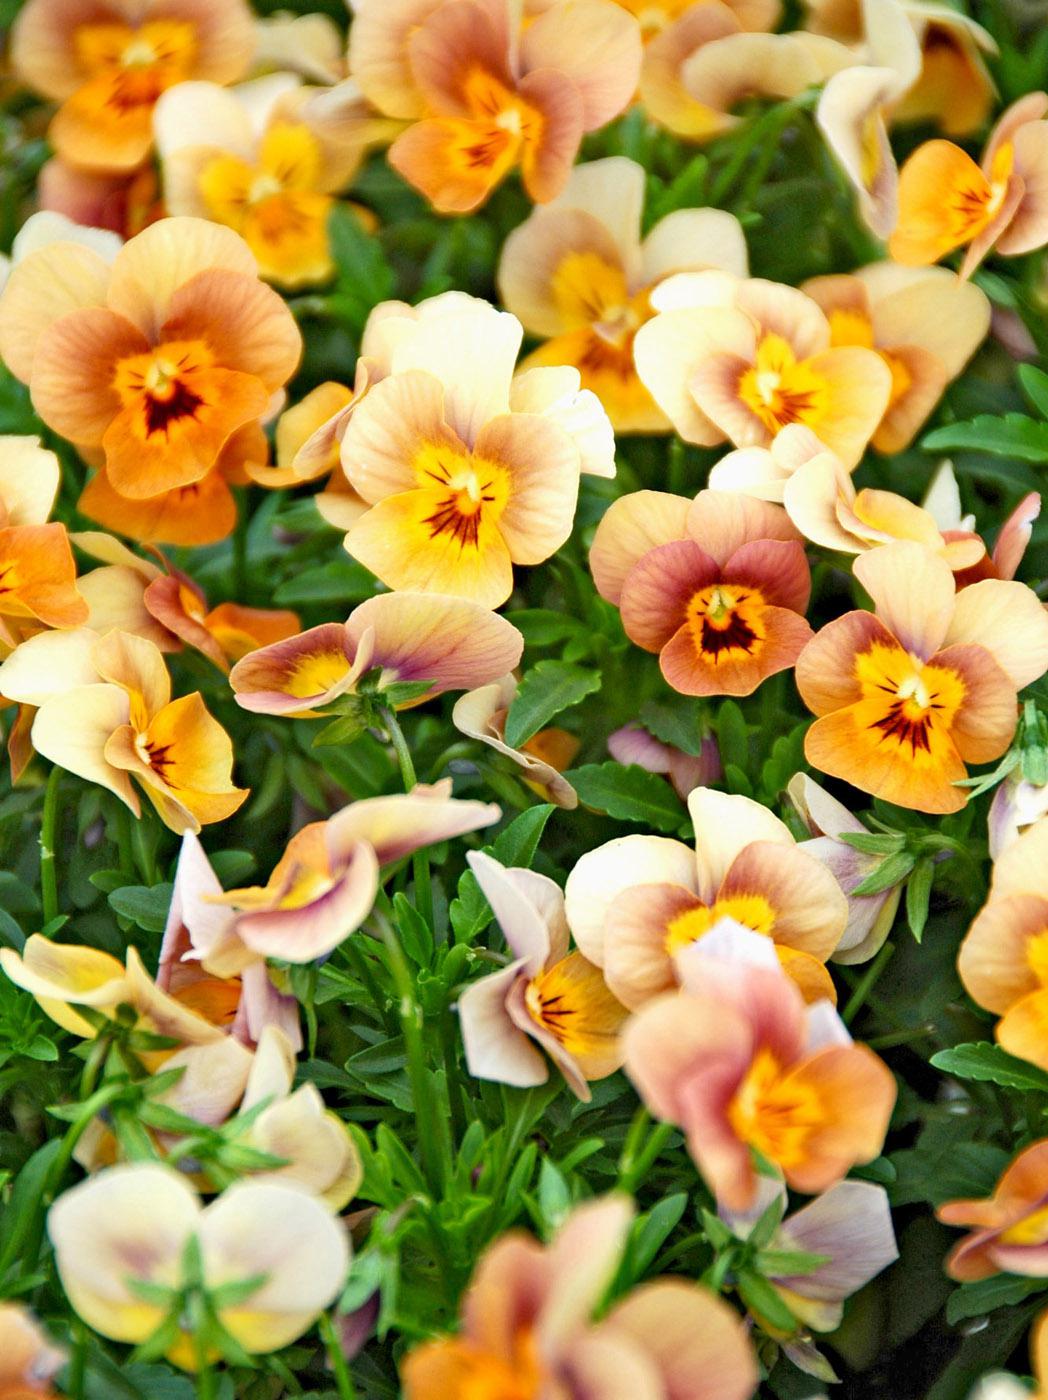 Angel Terracotta viola brings rare colors to the garden with its bright orange face that changes to various shades of terracotta with slight hints of mauve.